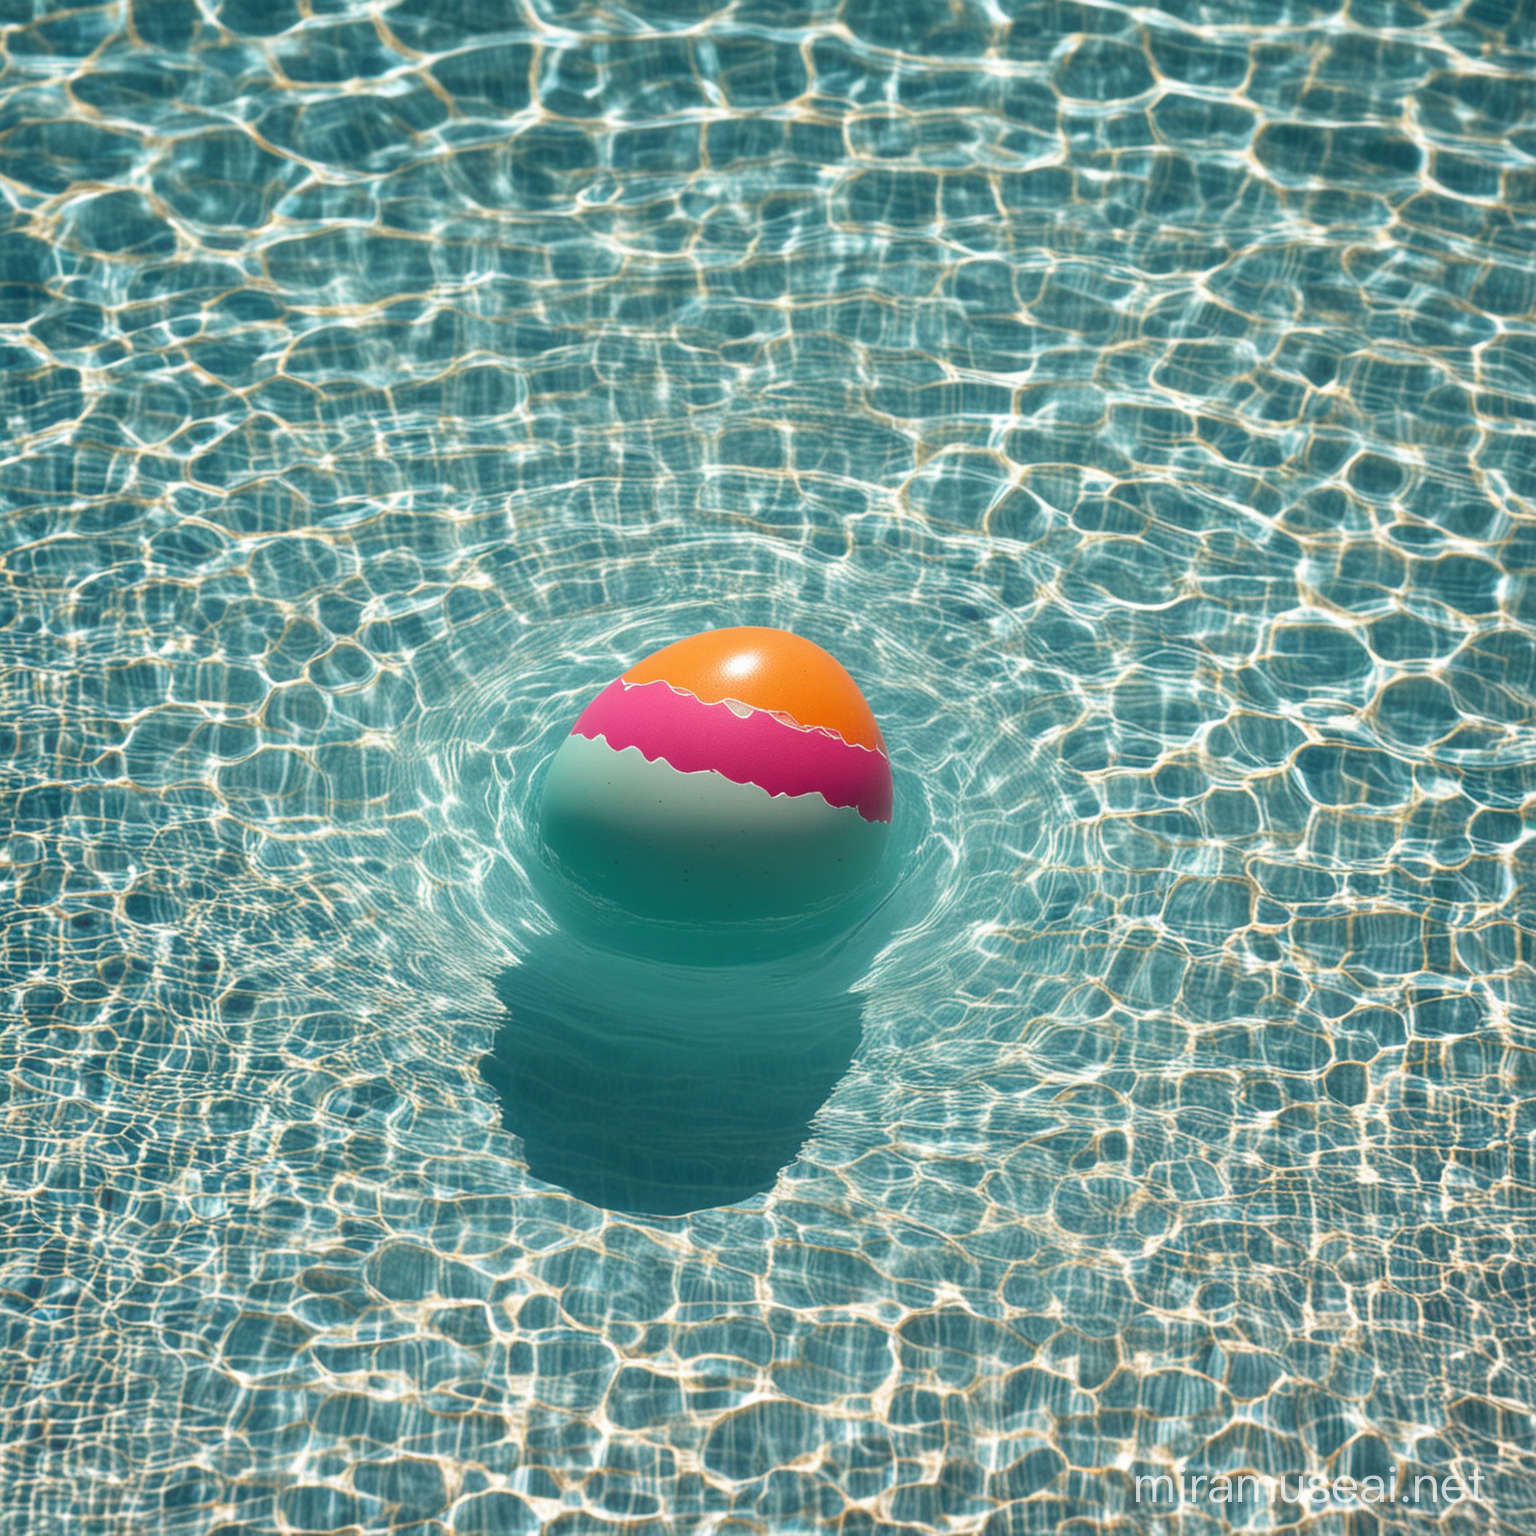 Colorful Easter Egg Floating in Sunlit Swimming Pool